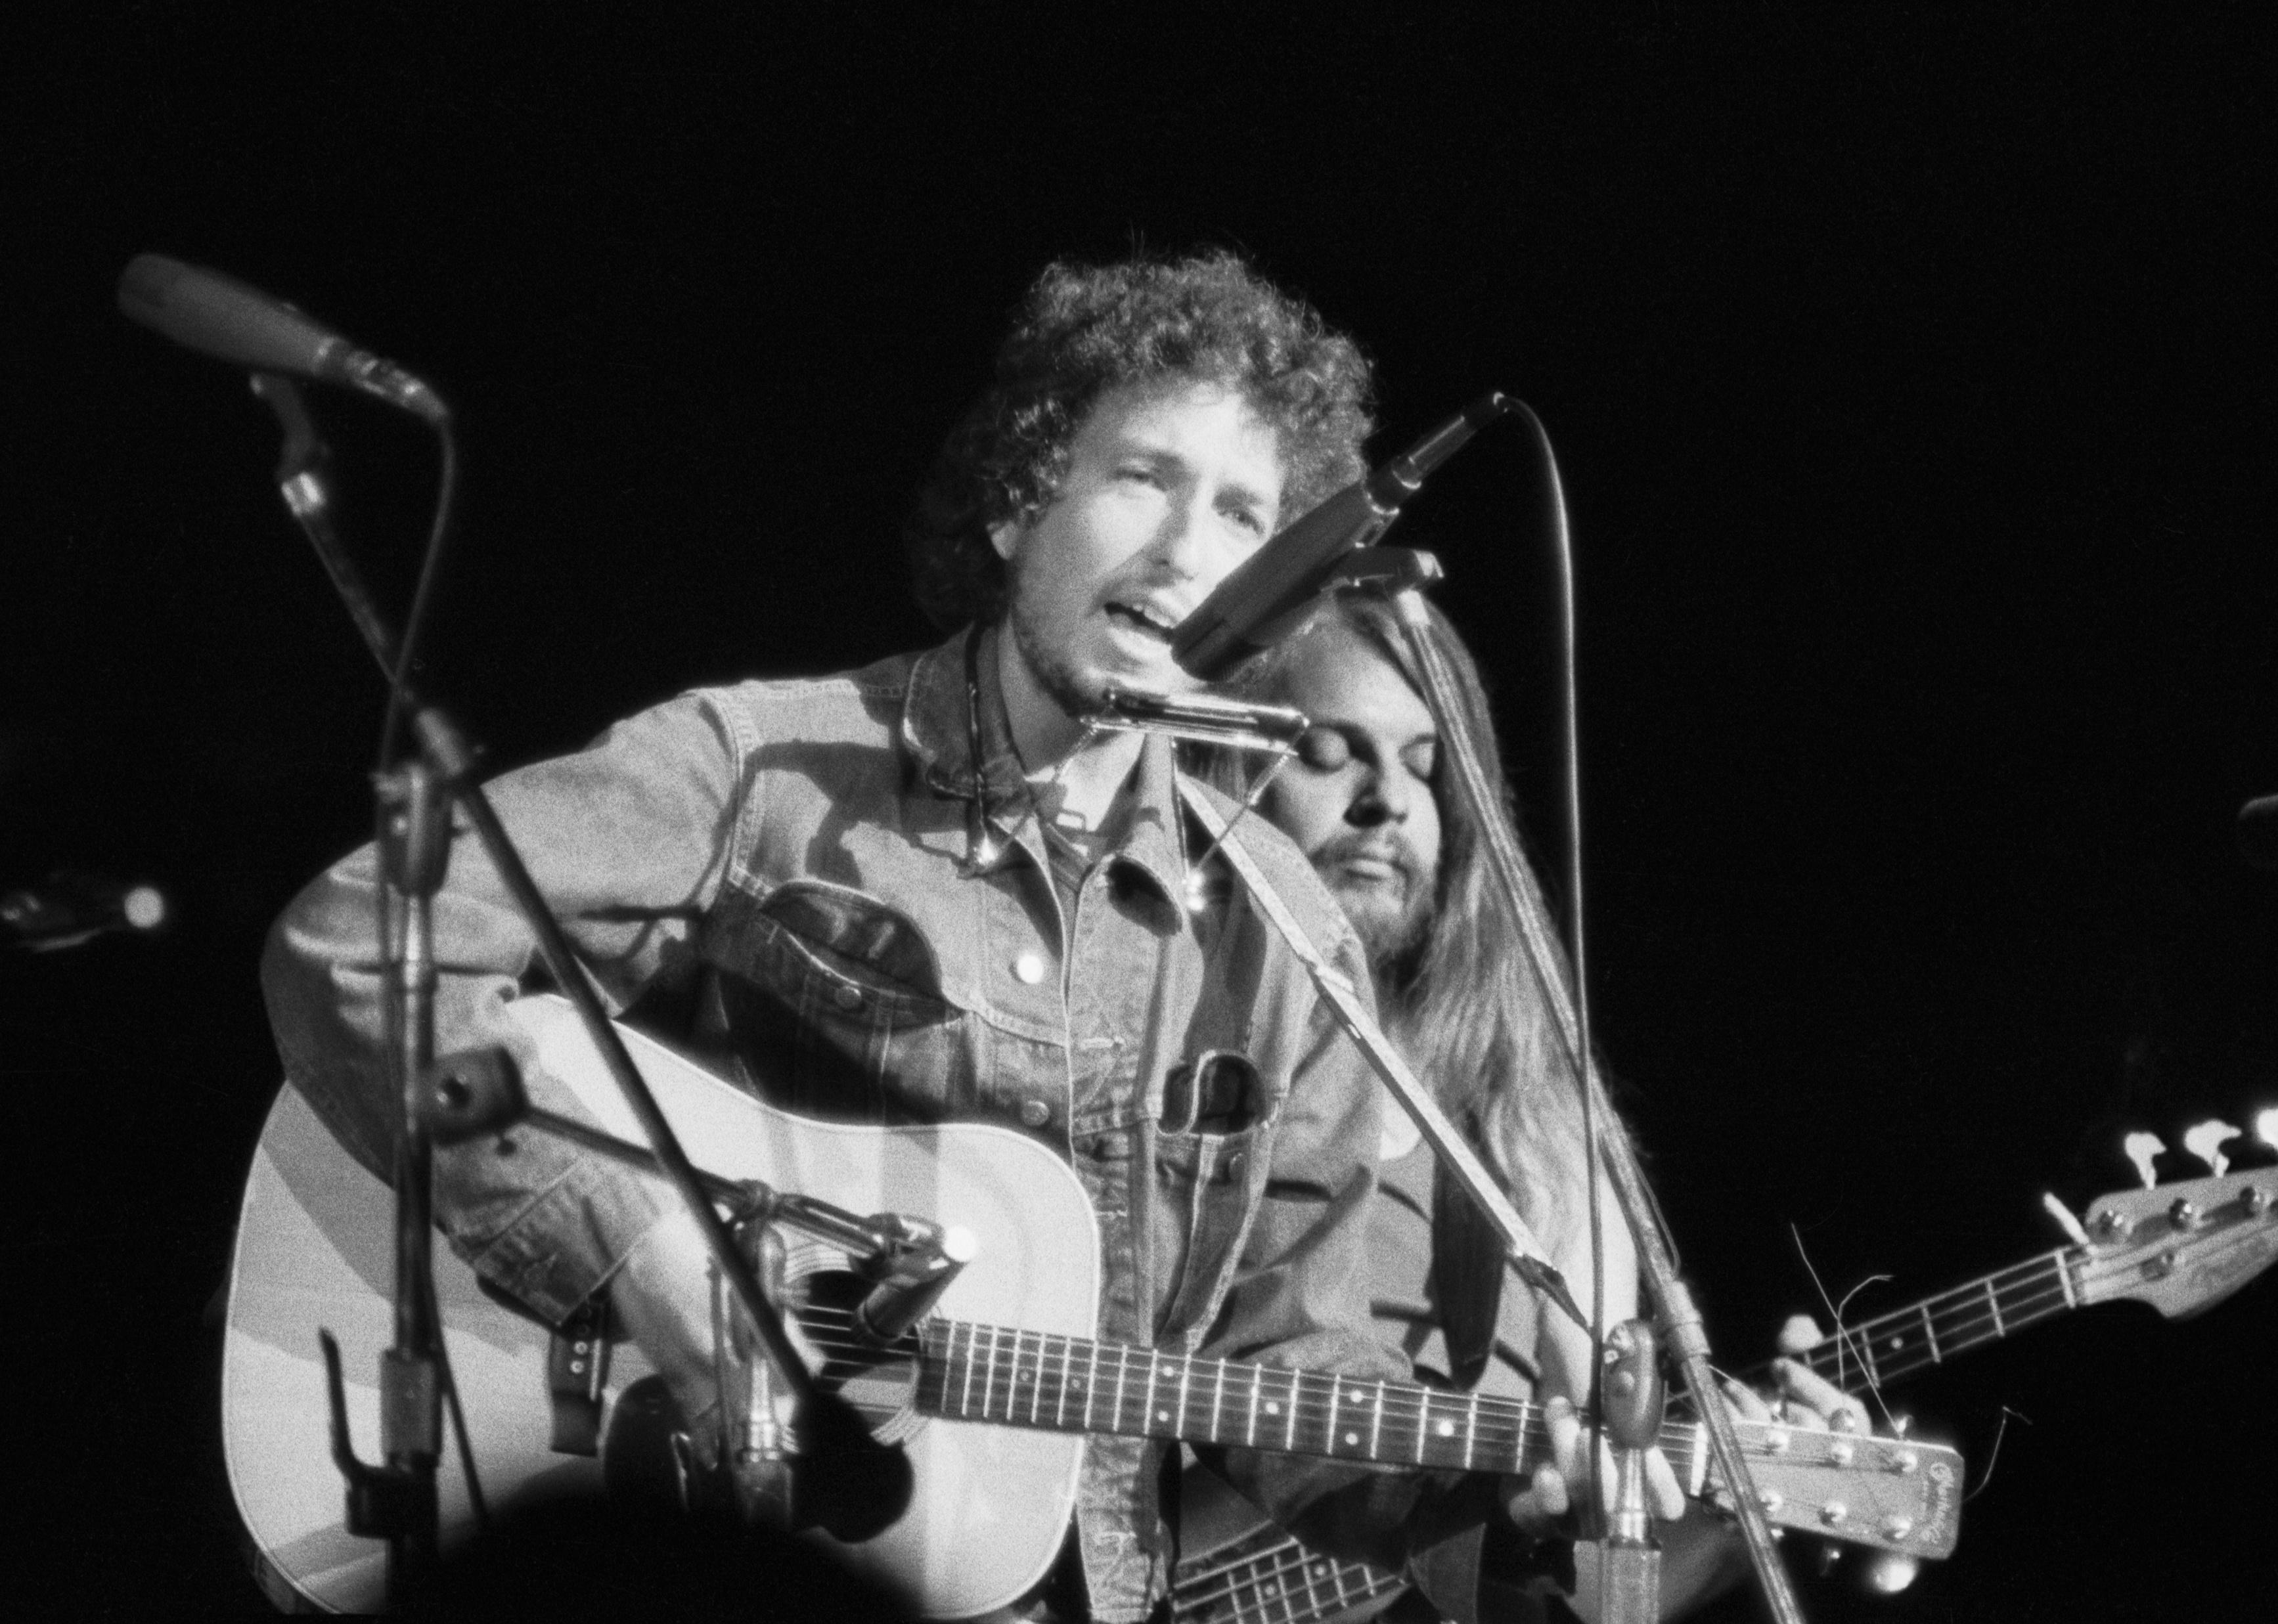 Bob Dylan performs at the Concert for Bangladesh at Madison Square Garden.